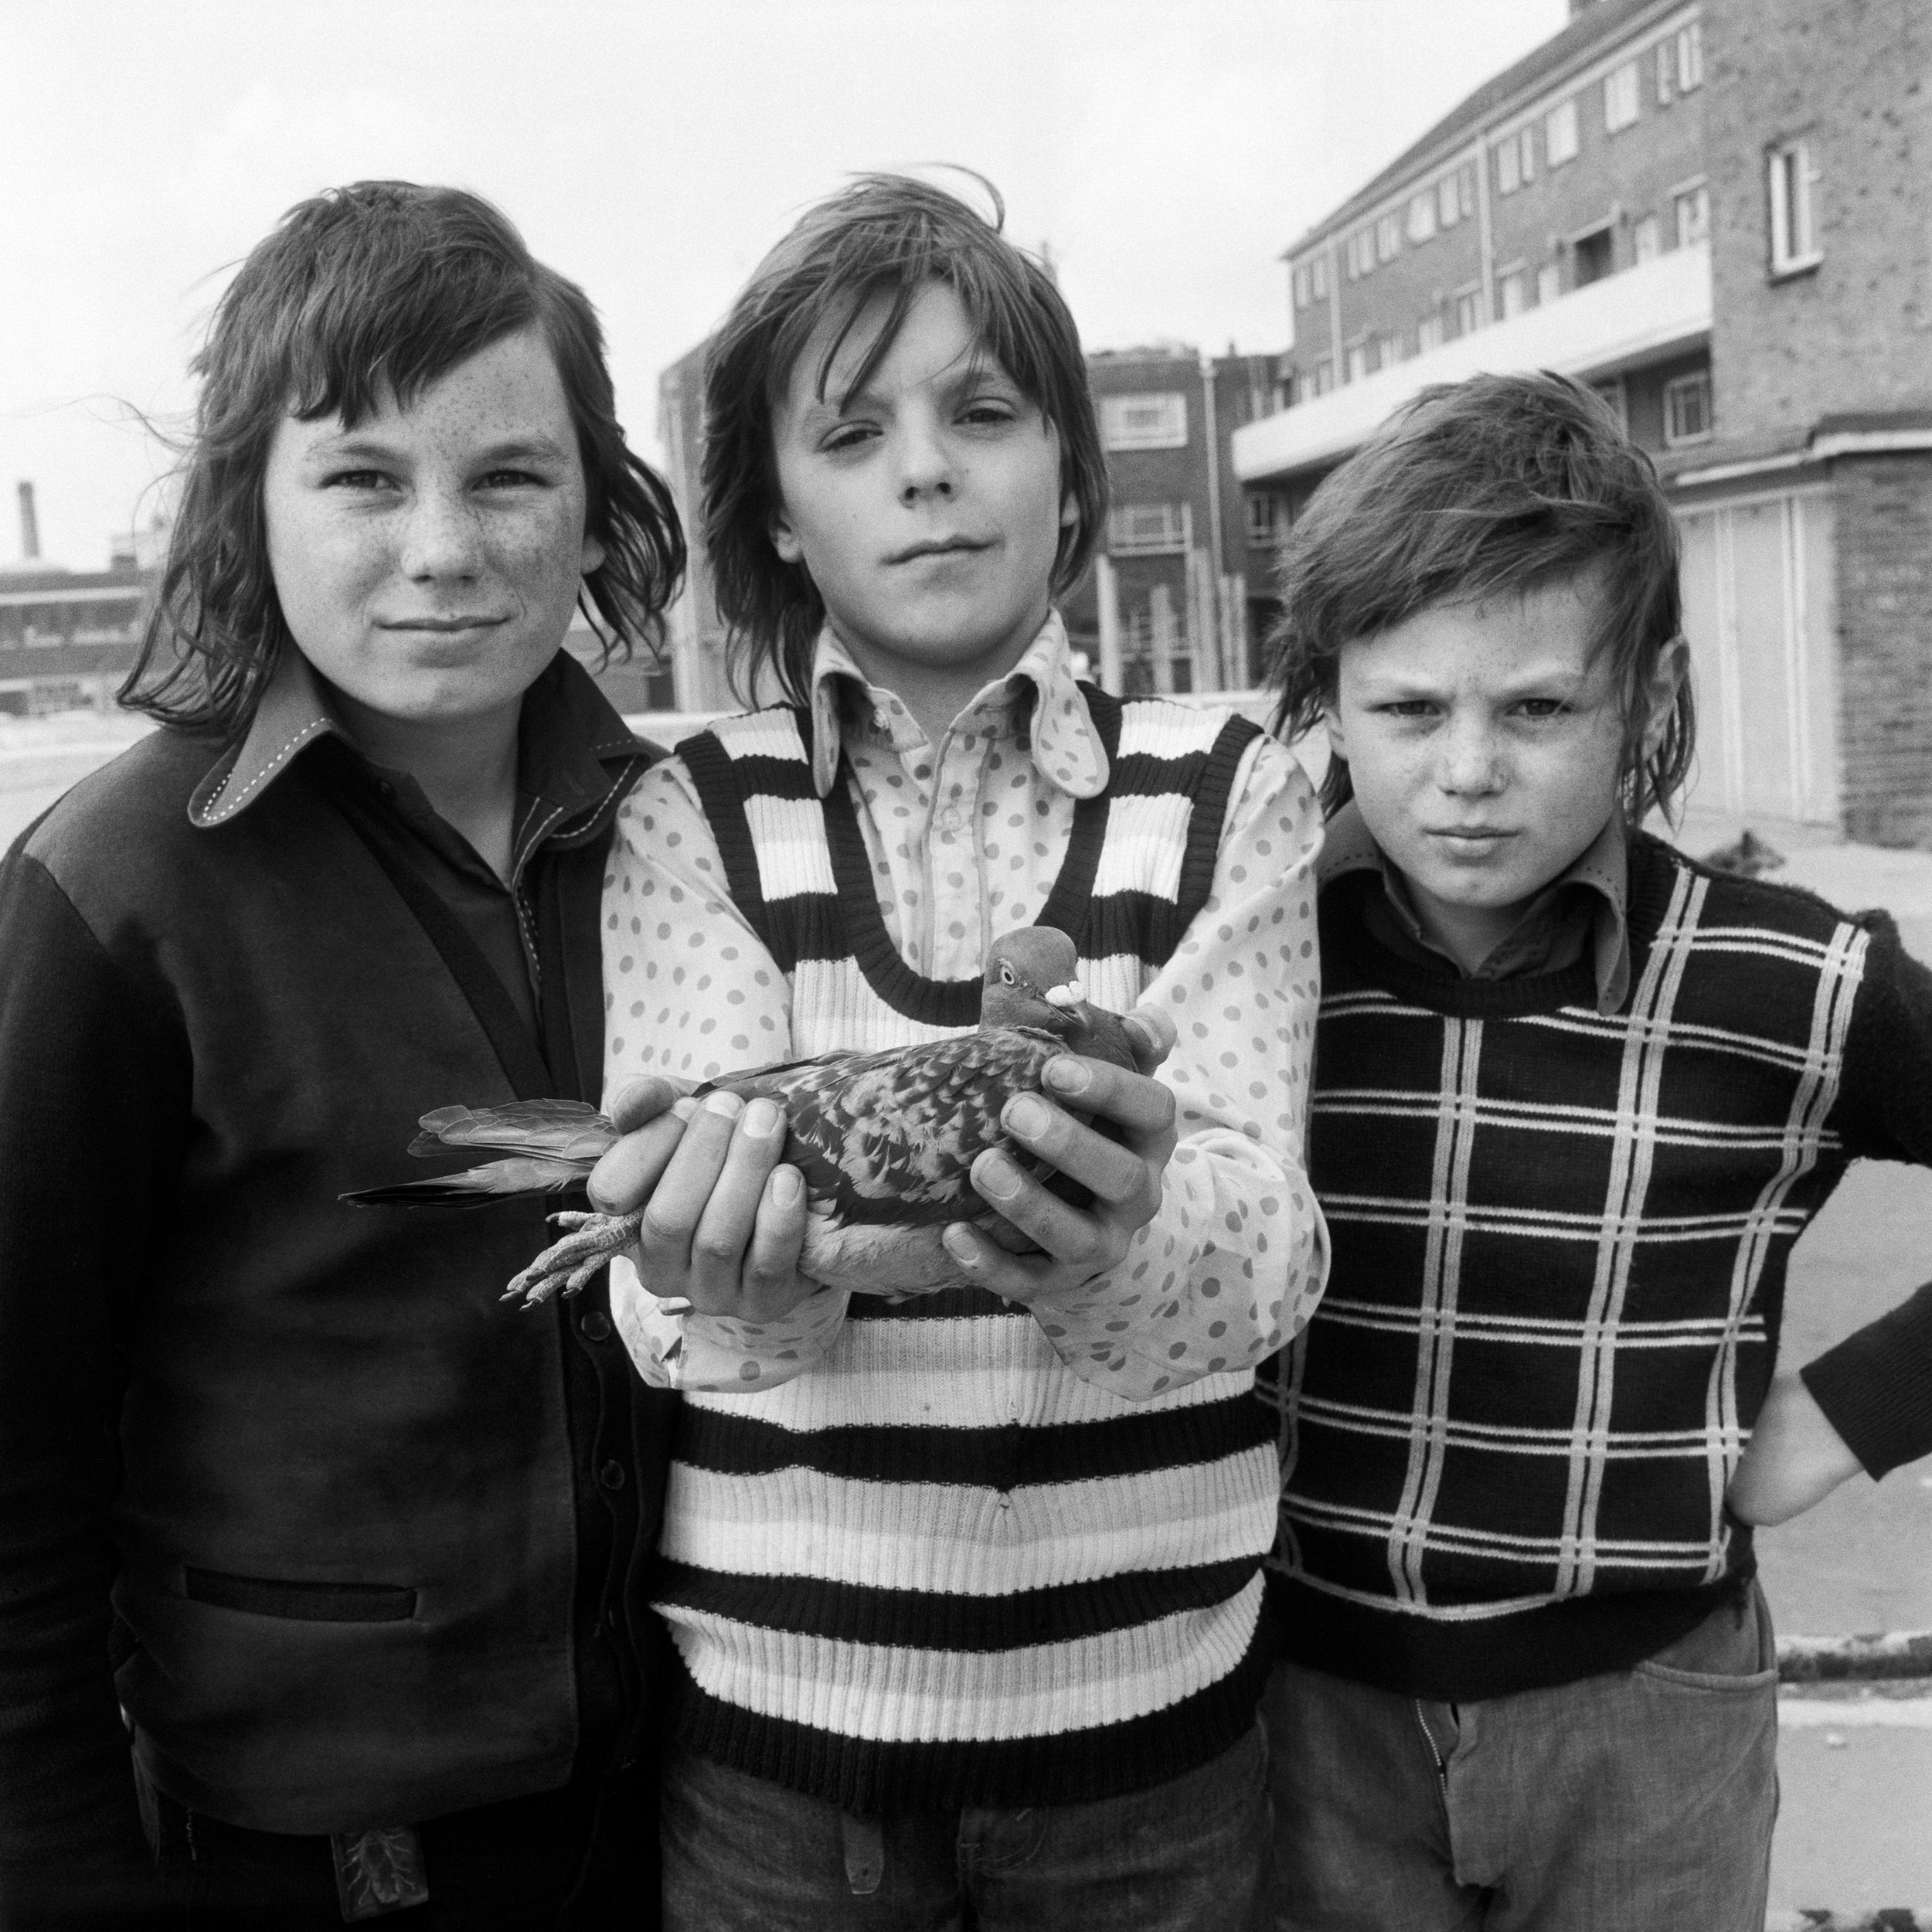  Group portrait from the   Free Photographic Omnibus  , John Payne, aged 11, with pigeon Chequer and friends the White brothers, Michael and Kalvin, Portsmouth. April 1974 ©Daniel Meadows   